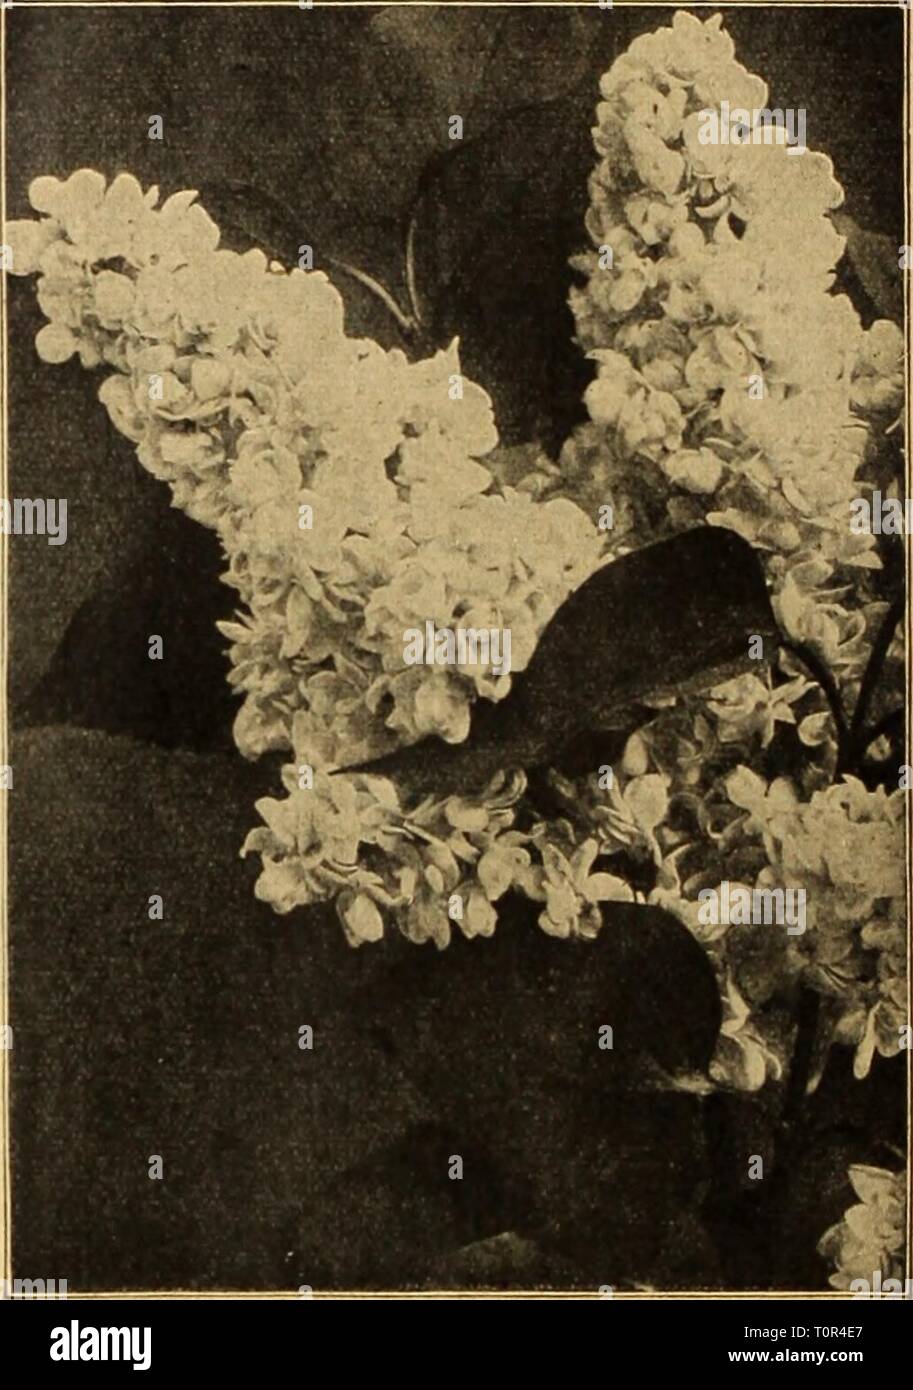 Dreer's autumn catalogue 1926 (1926) Dreer's autumn catalogue 1926  dreersautumncata1926henr Year: 1926  VlTEX Macrophvlla Syringa or Lilac, Mme. Marie Lemoine — President Grevy. Magnificent panicles of large double purplish-blue flowers. SI.00 each. Stephanandra Flexuosa. Of gracefxil fountain-like habit of growth with finely and delicately cut leaves which in the autumn assume brilliant reddish tints; the flowers are creamy white. 60 cts. each. Tamarix Africana {Tamarisk). Strong, slender, tall growing, irregular Shrubs, with feathery foliage and small, delicate flowers, borne profusely on g Stock Photo